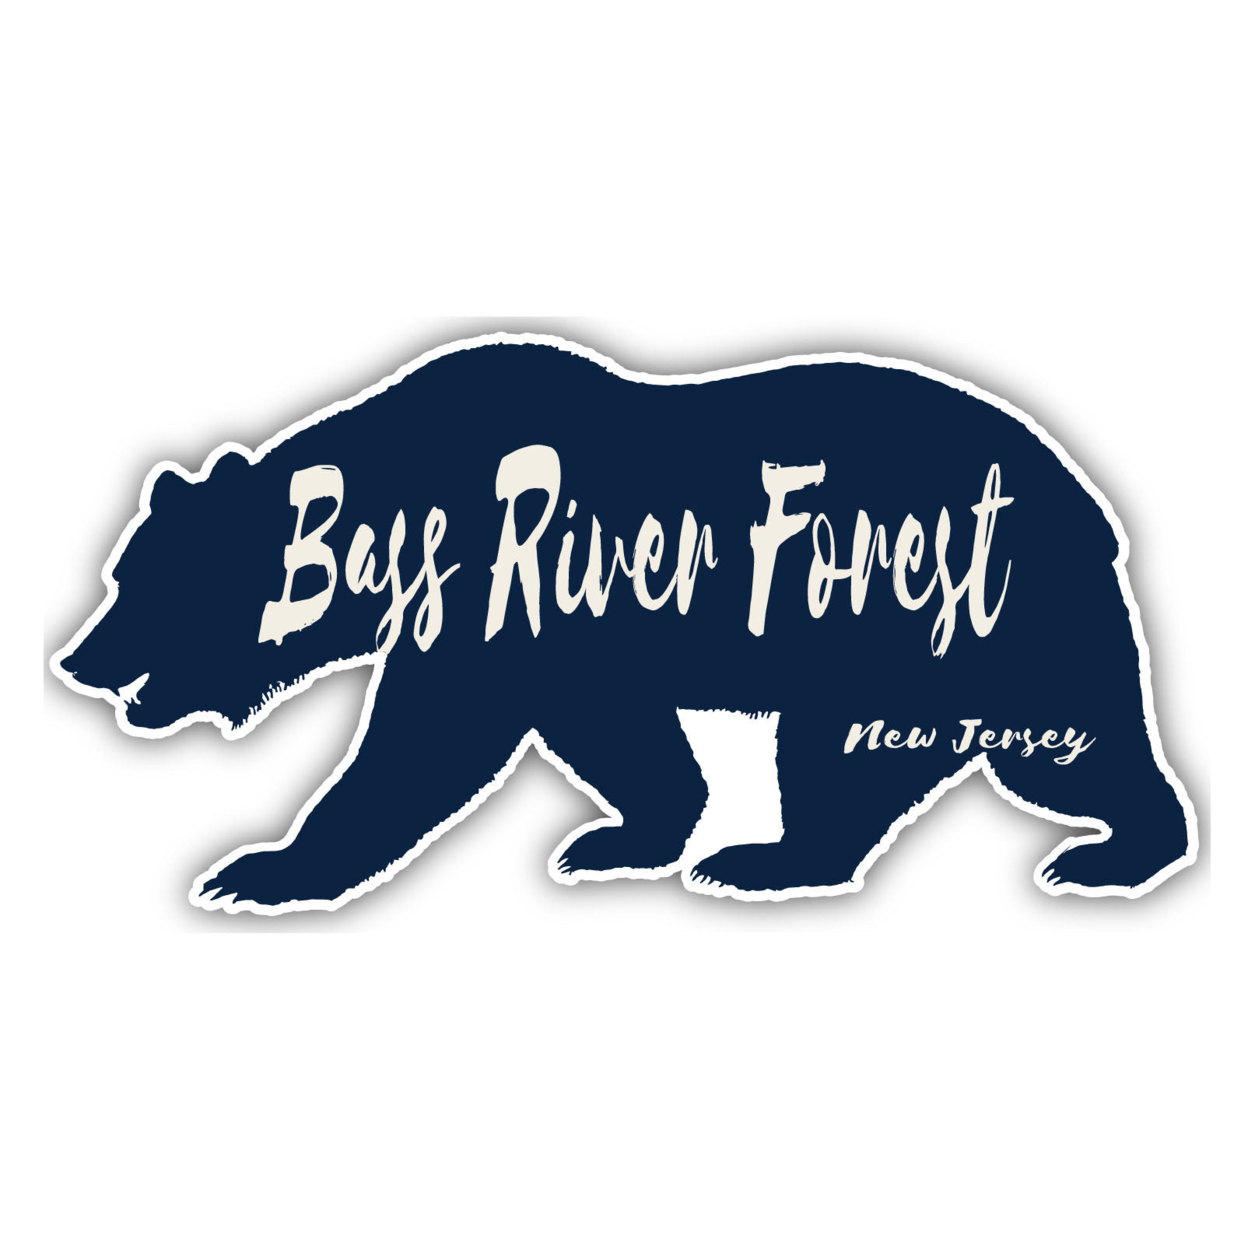 Bass River Forest New Jersey Souvenir Decorative Stickers (Choose Theme And Size) - Single Unit, 8-Inch, Bear